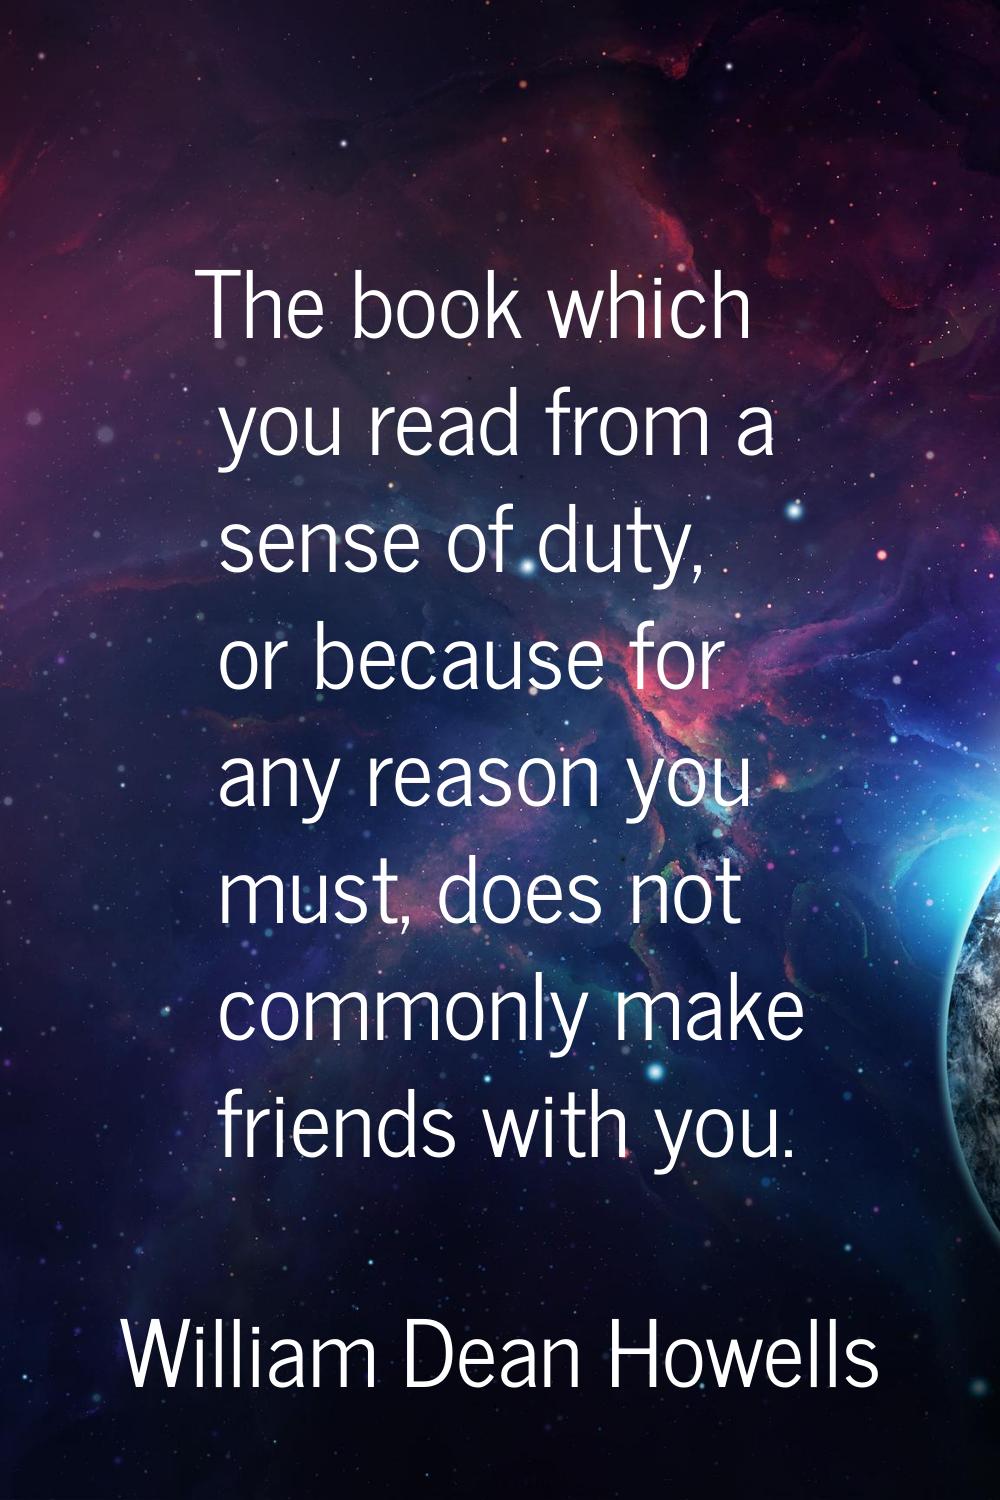 The book which you read from a sense of duty, or because for any reason you must, does not commonly